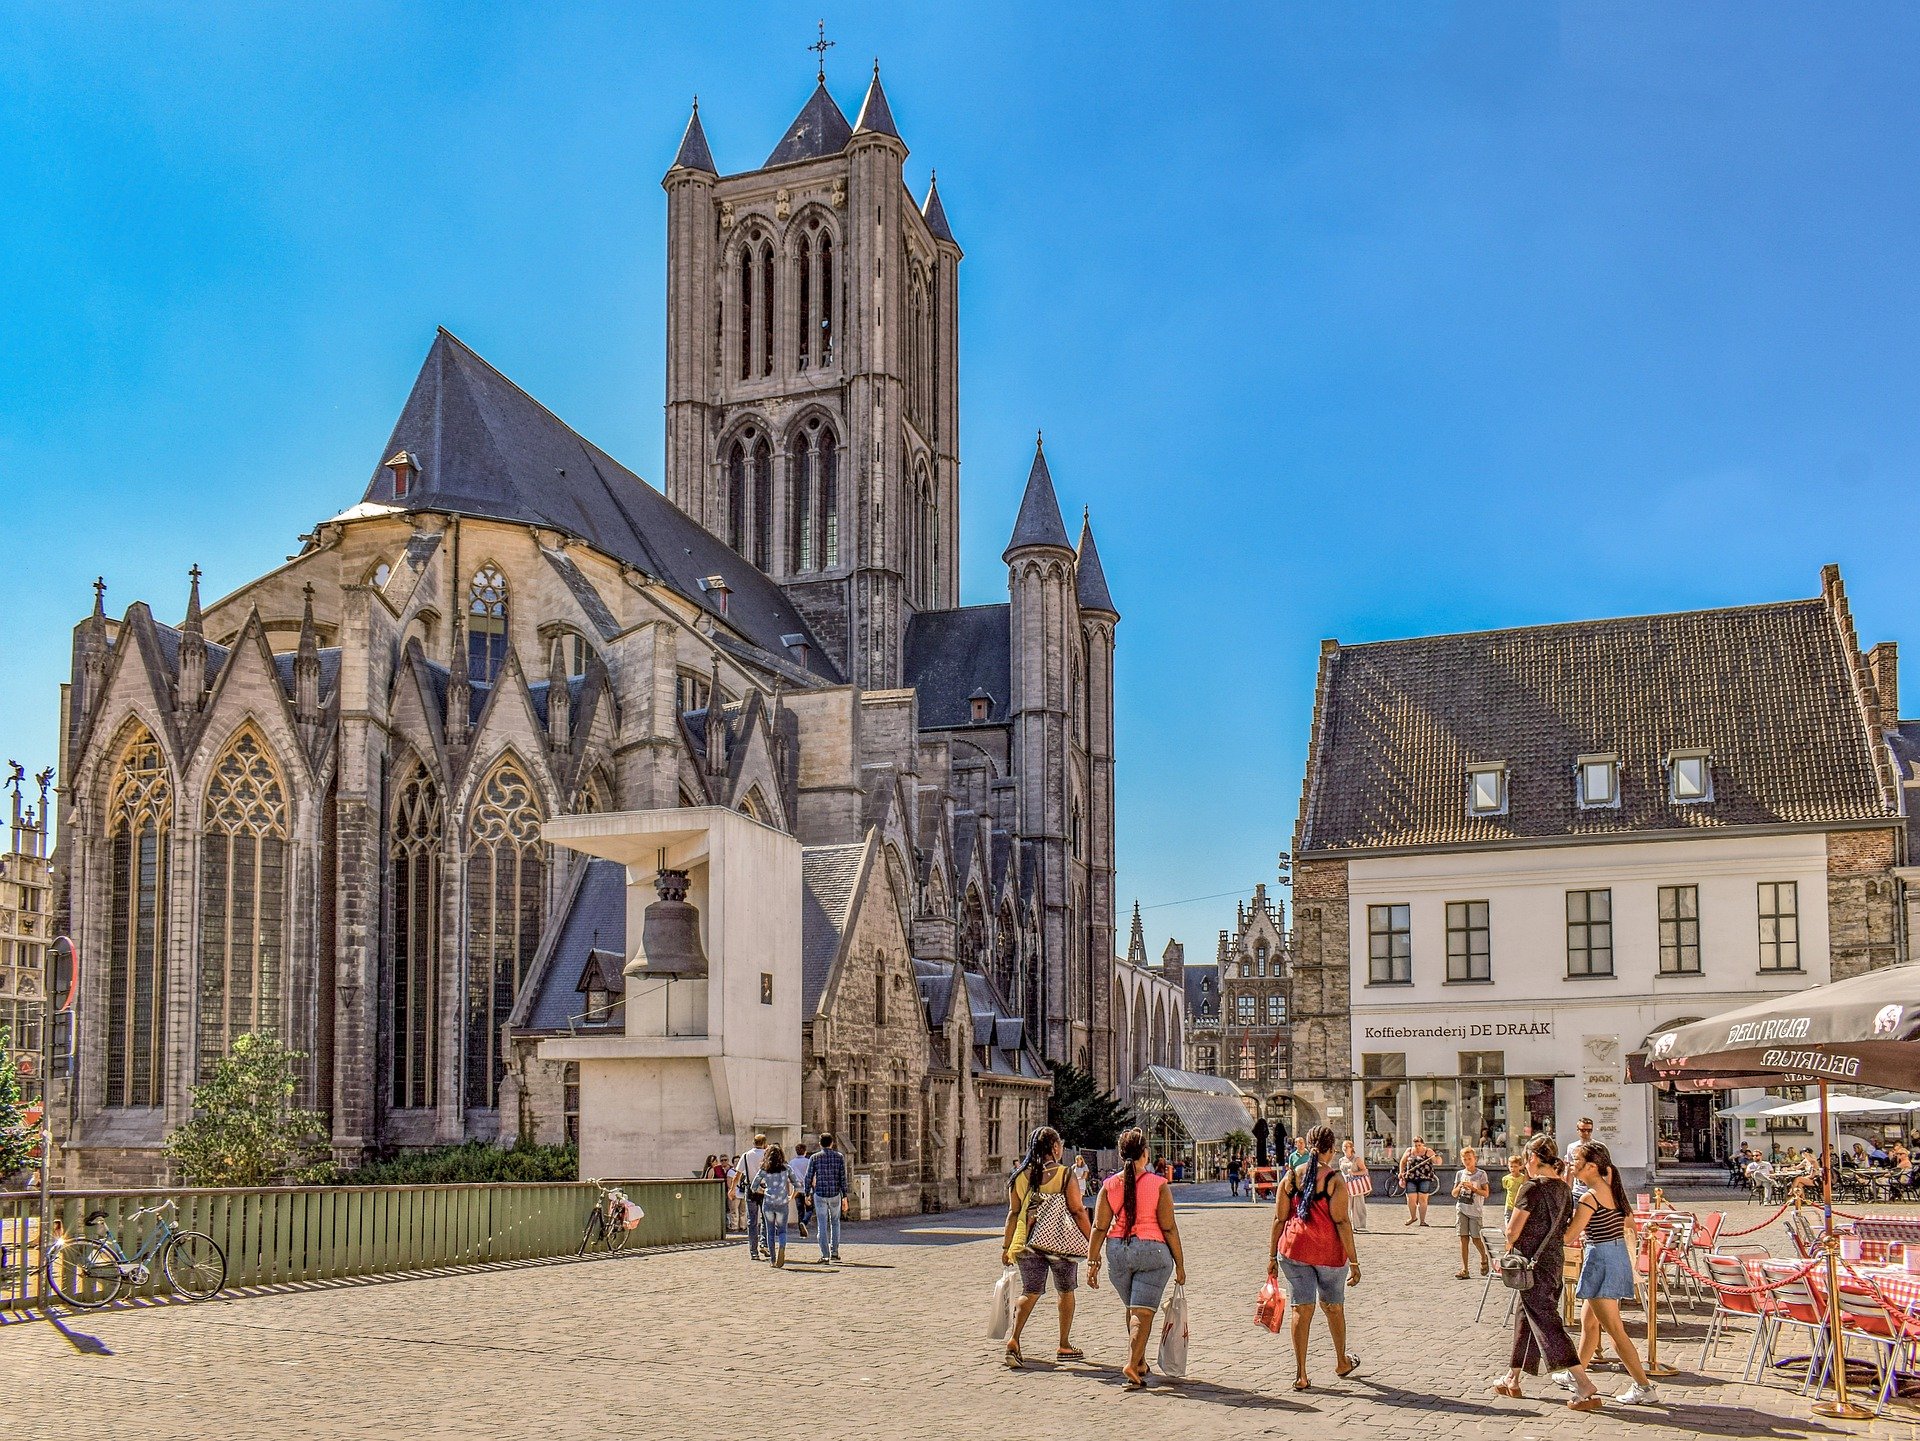 A medieval city center with church and old buildings and people in Belgium